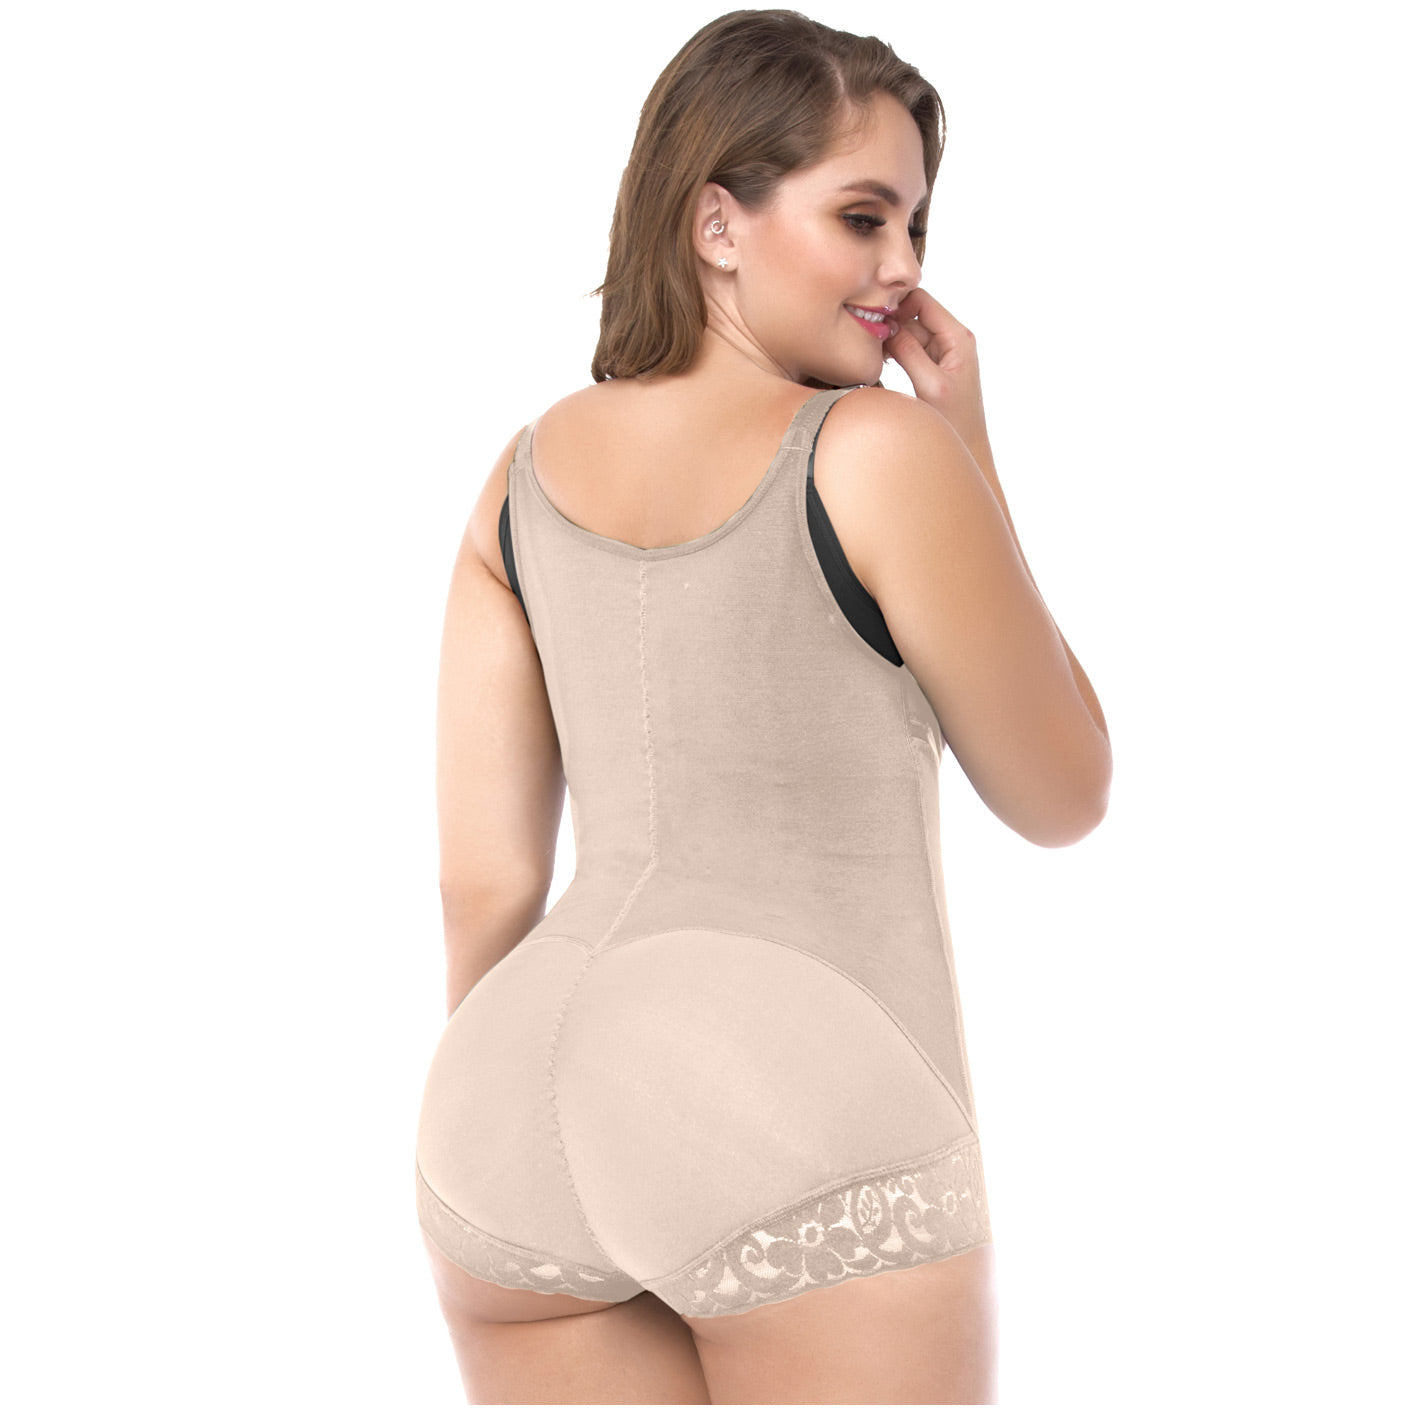 UpLady 6184 | Butt Lifting Shapewear Bodysuit with Wide Hips - 2XS / Beige